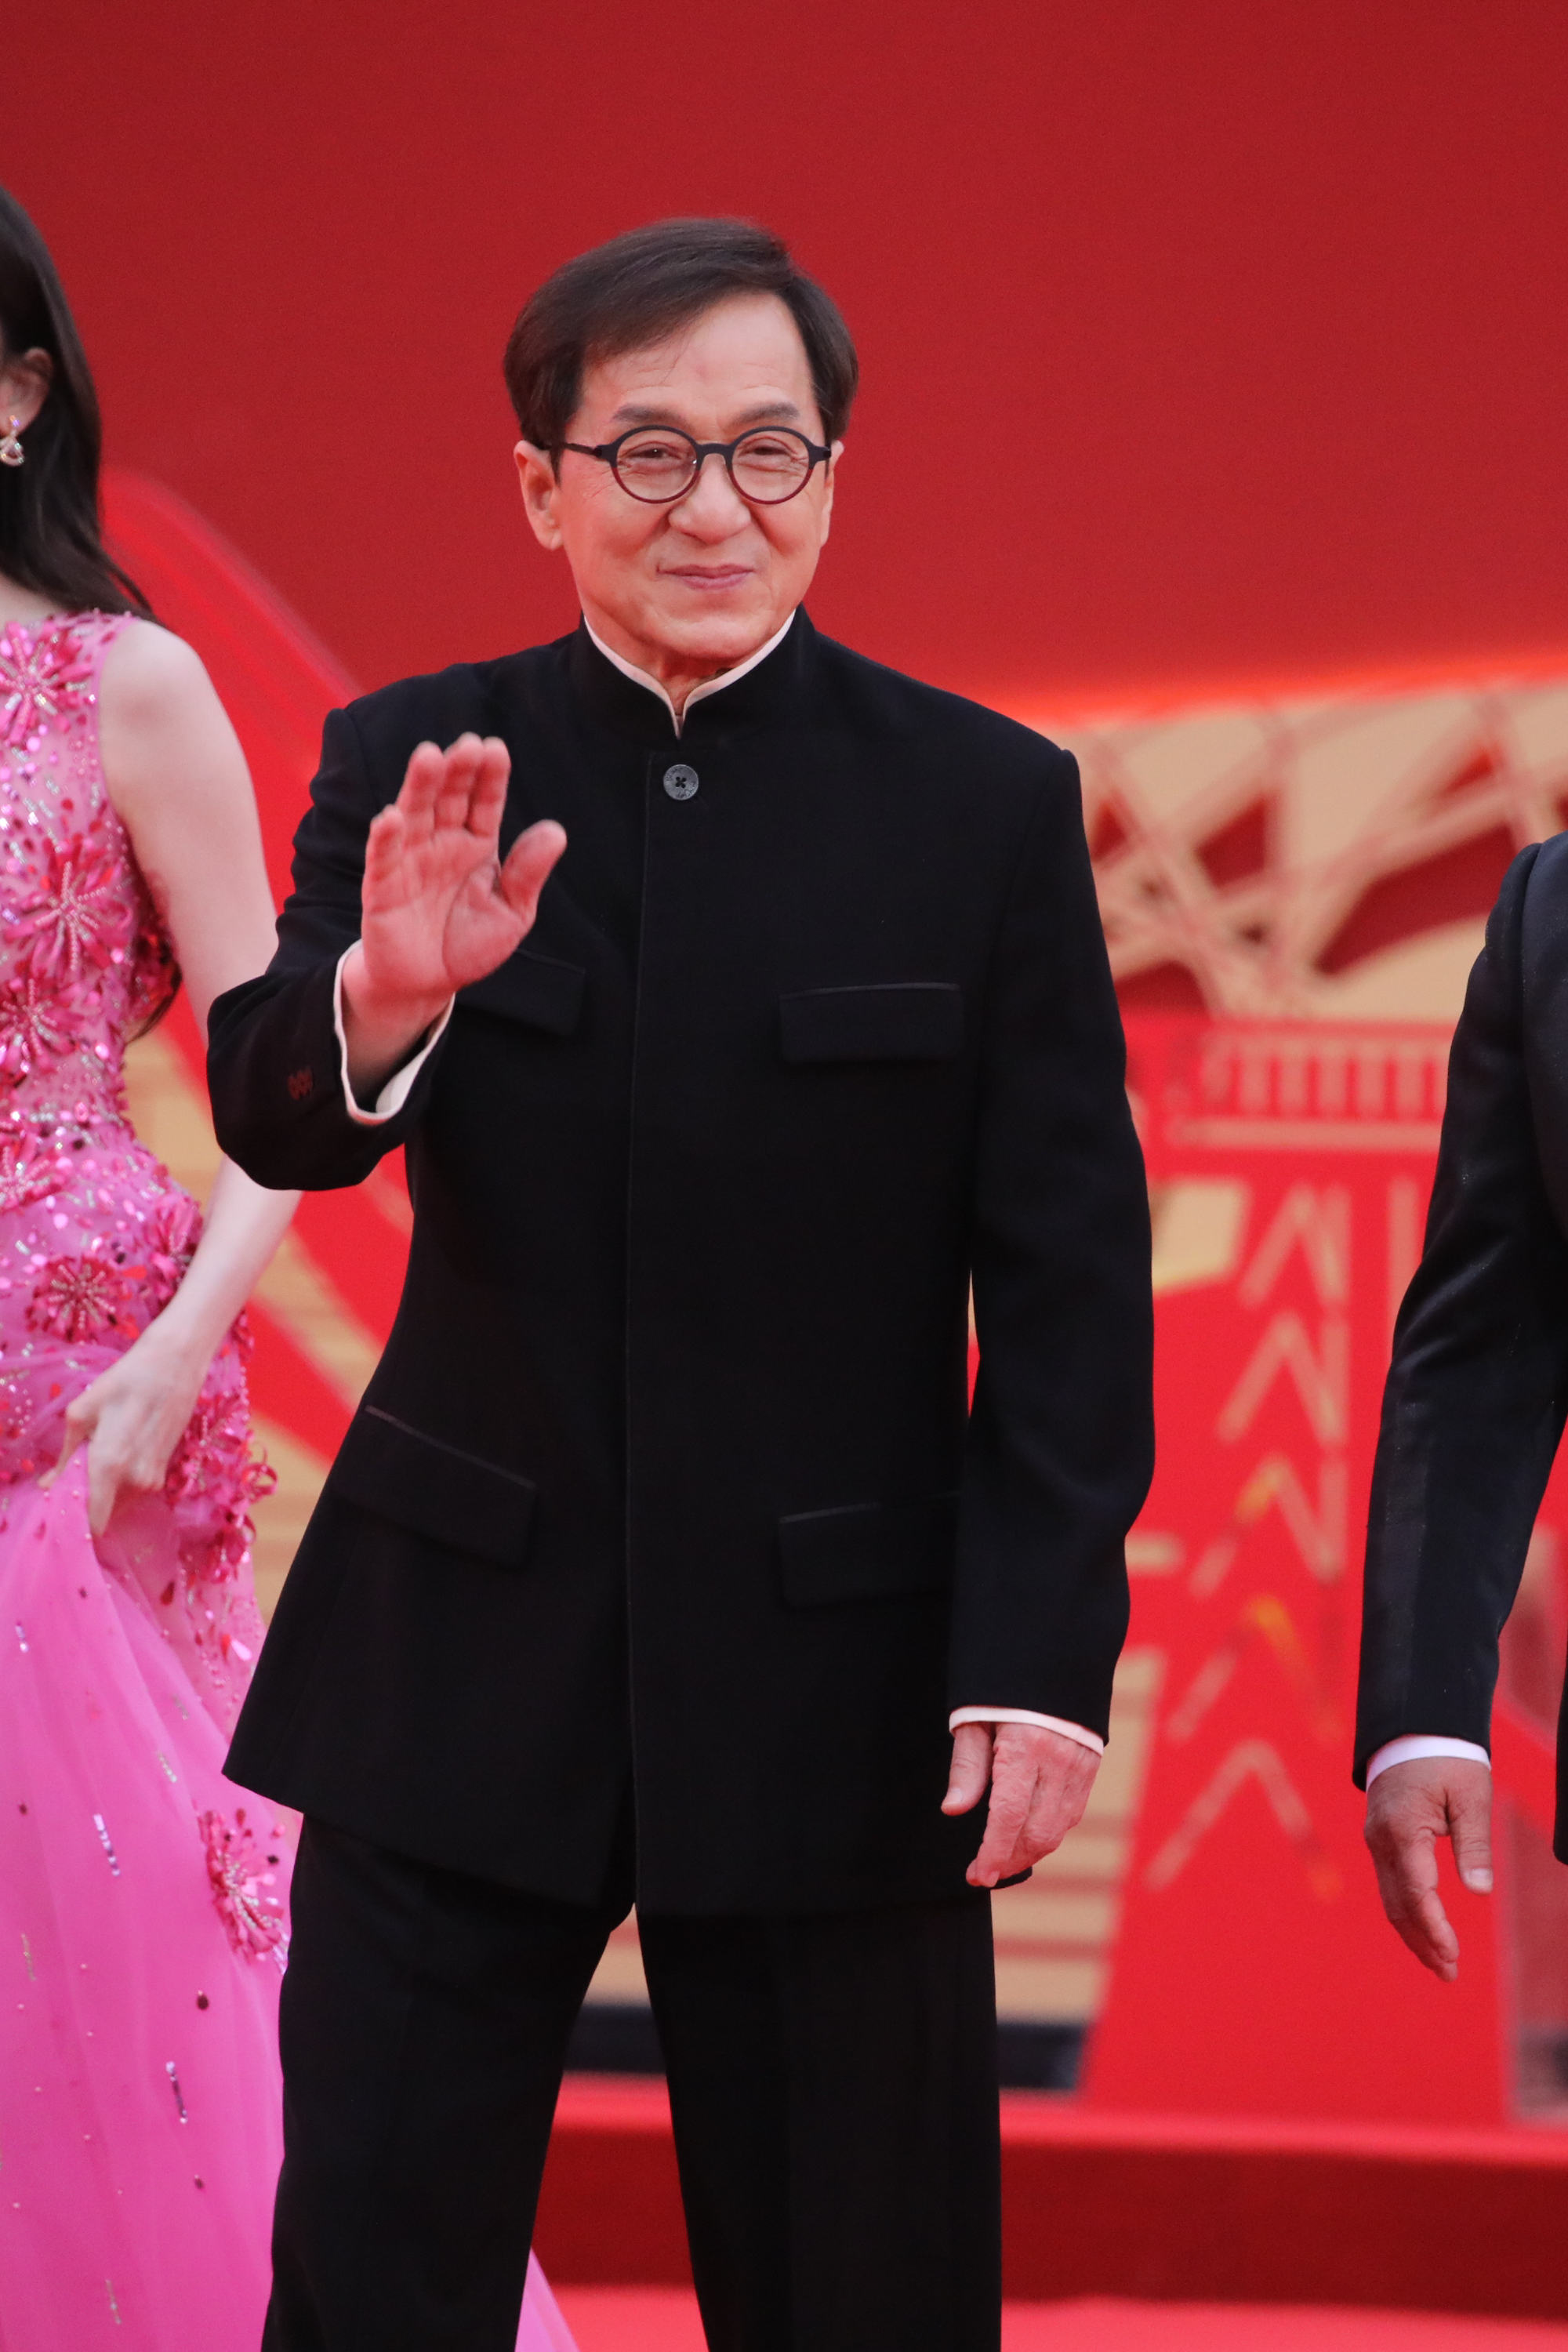 Jackie Chan on the red carpet at the 2023 Beijing International Film Festival on April 21, 2023 in Beijing, China | Source: Getty Images